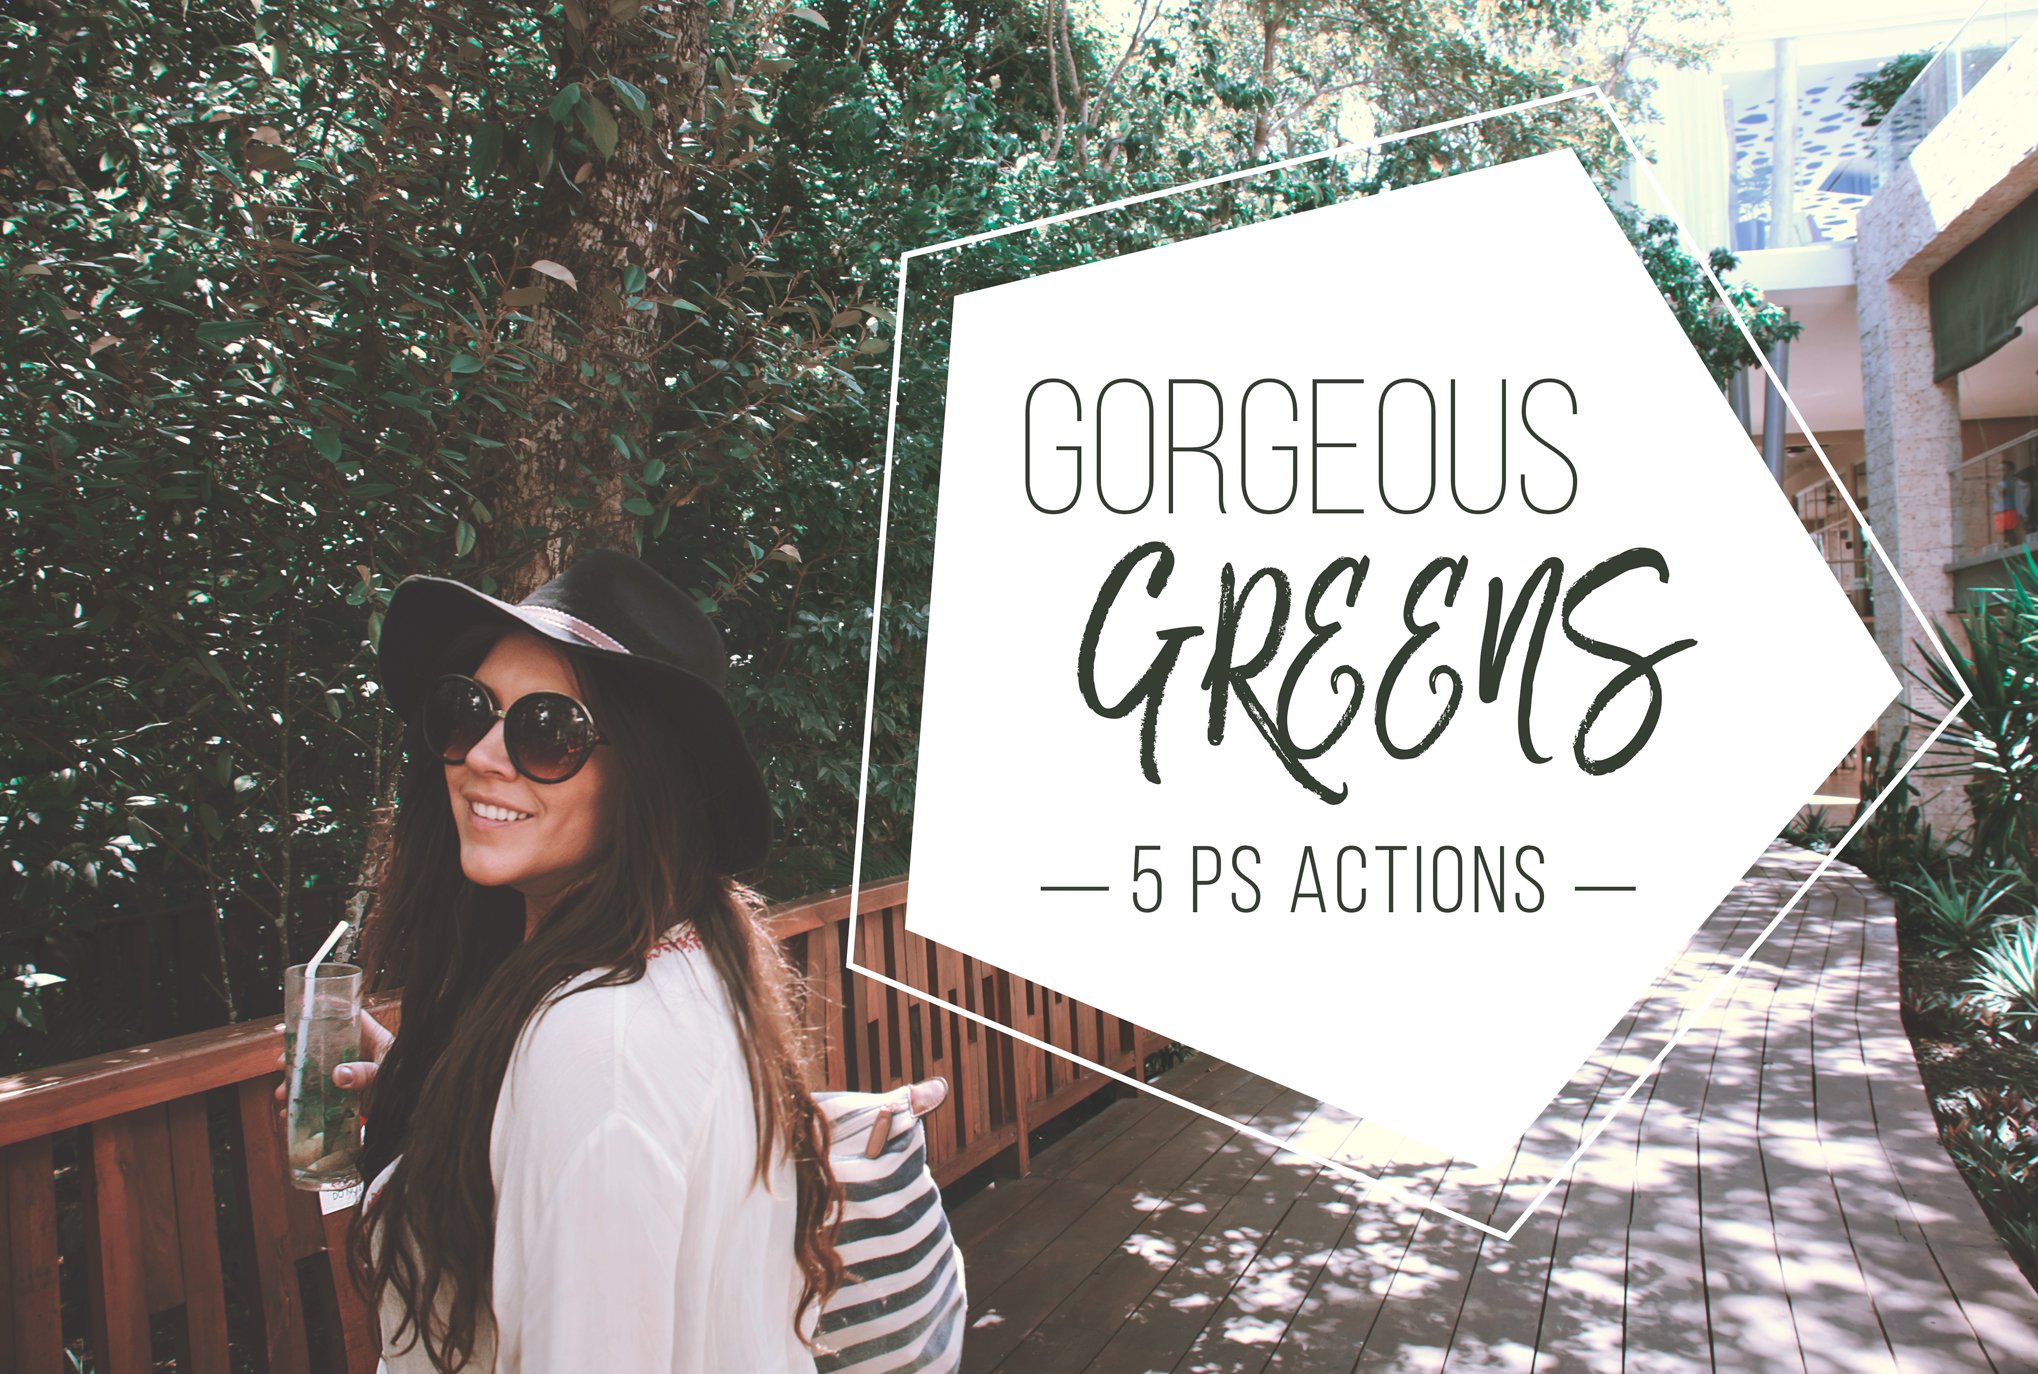 Gorgeous Greens PS Action Setcover image.